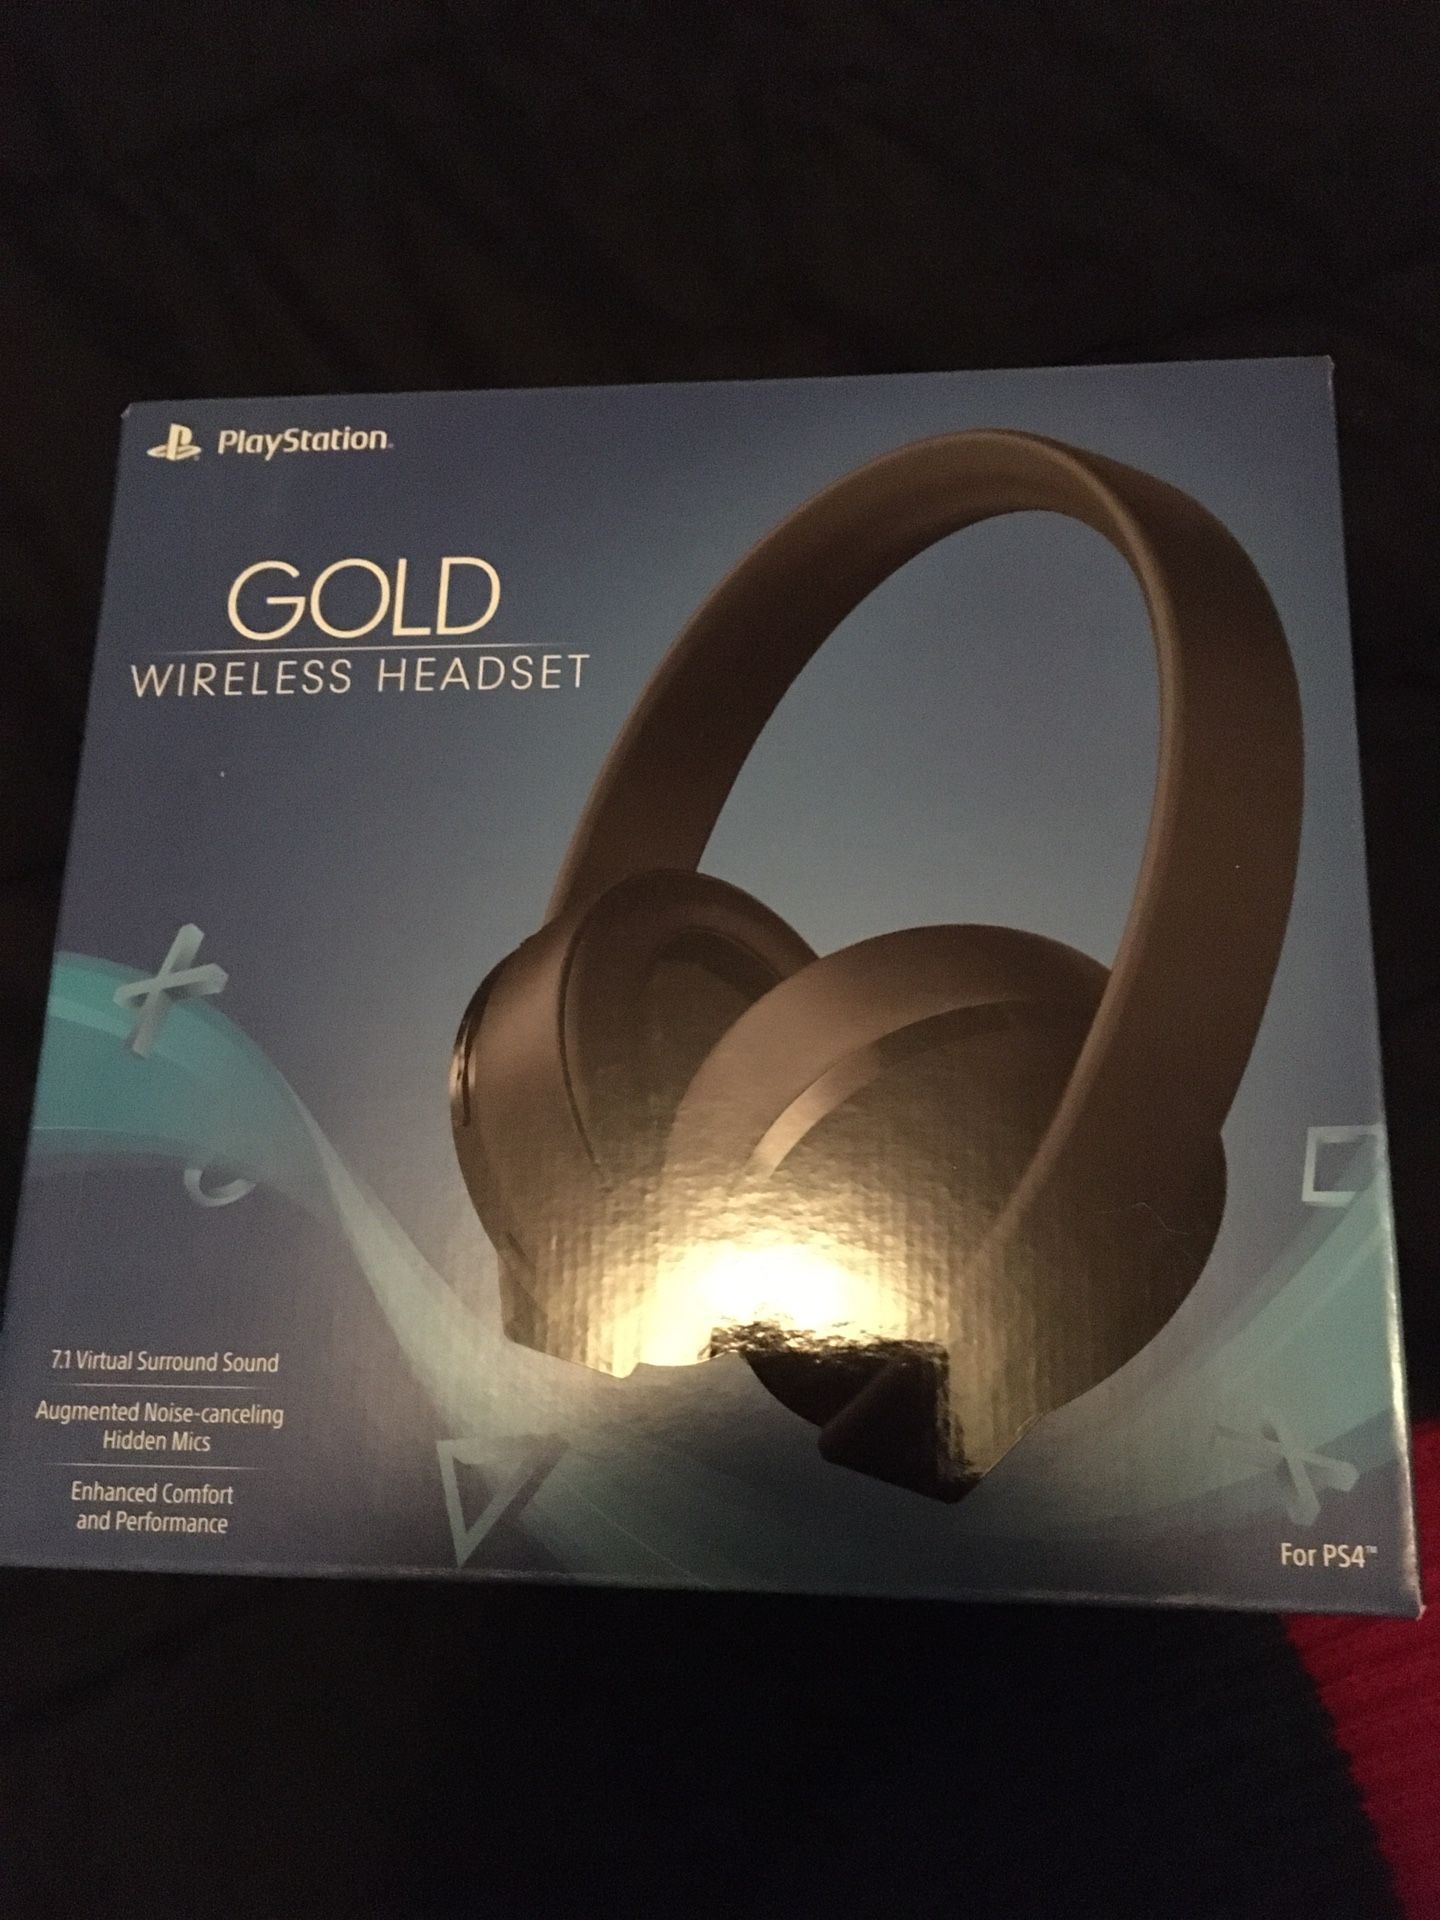 Gold wireless Headset PS4 Unopened package